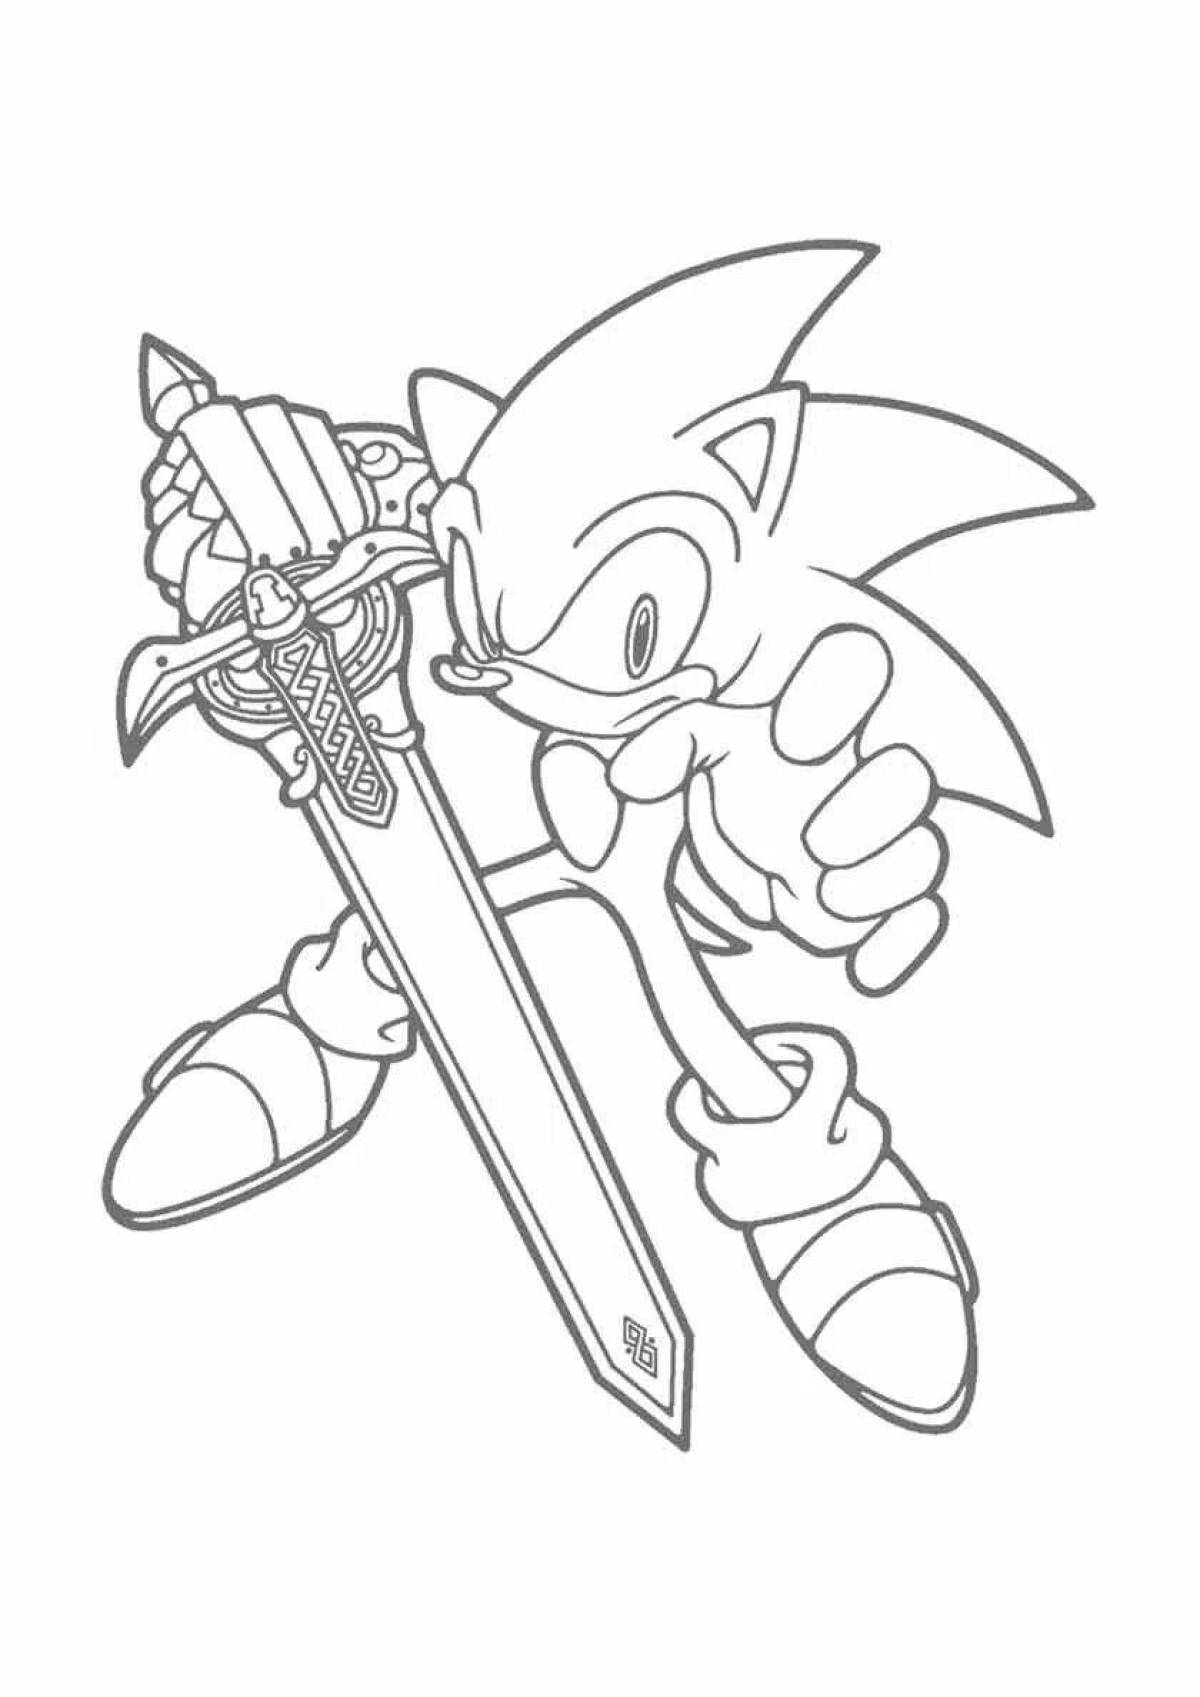 Colorfully illustrated excalibur sonic coloring book